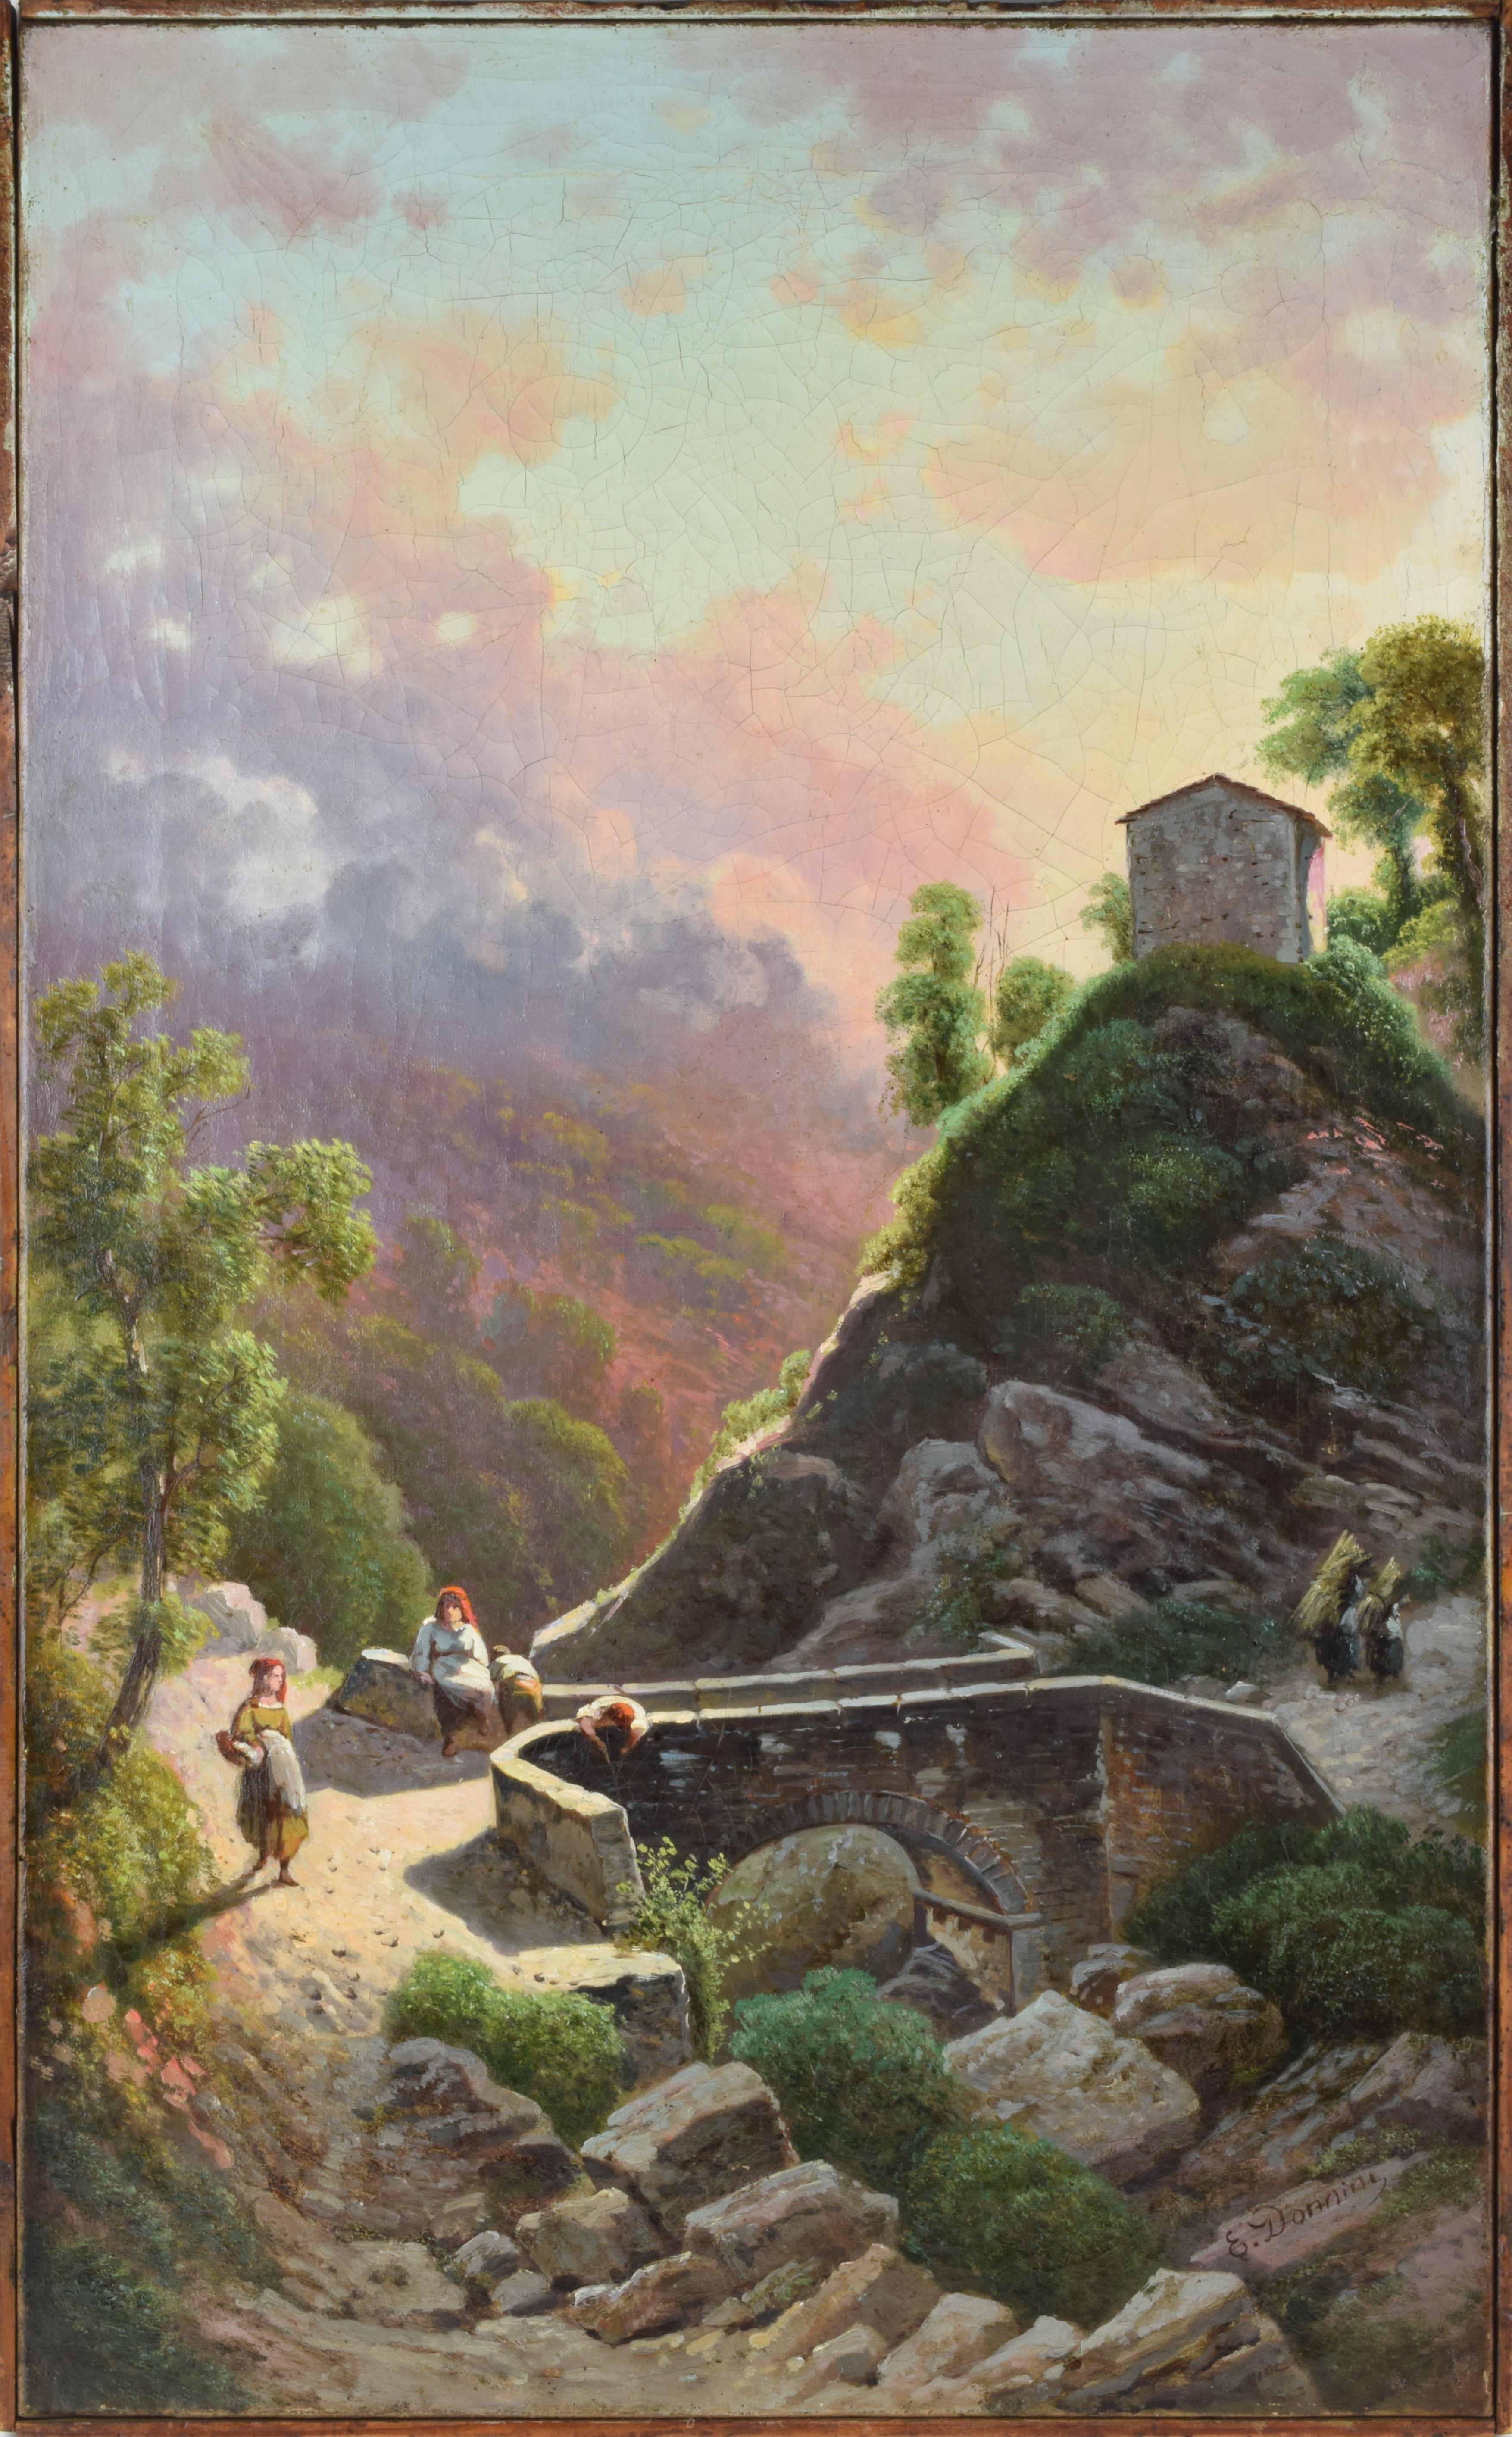 Tuscan landscape with bridge over a stream and peasant women
Signed 